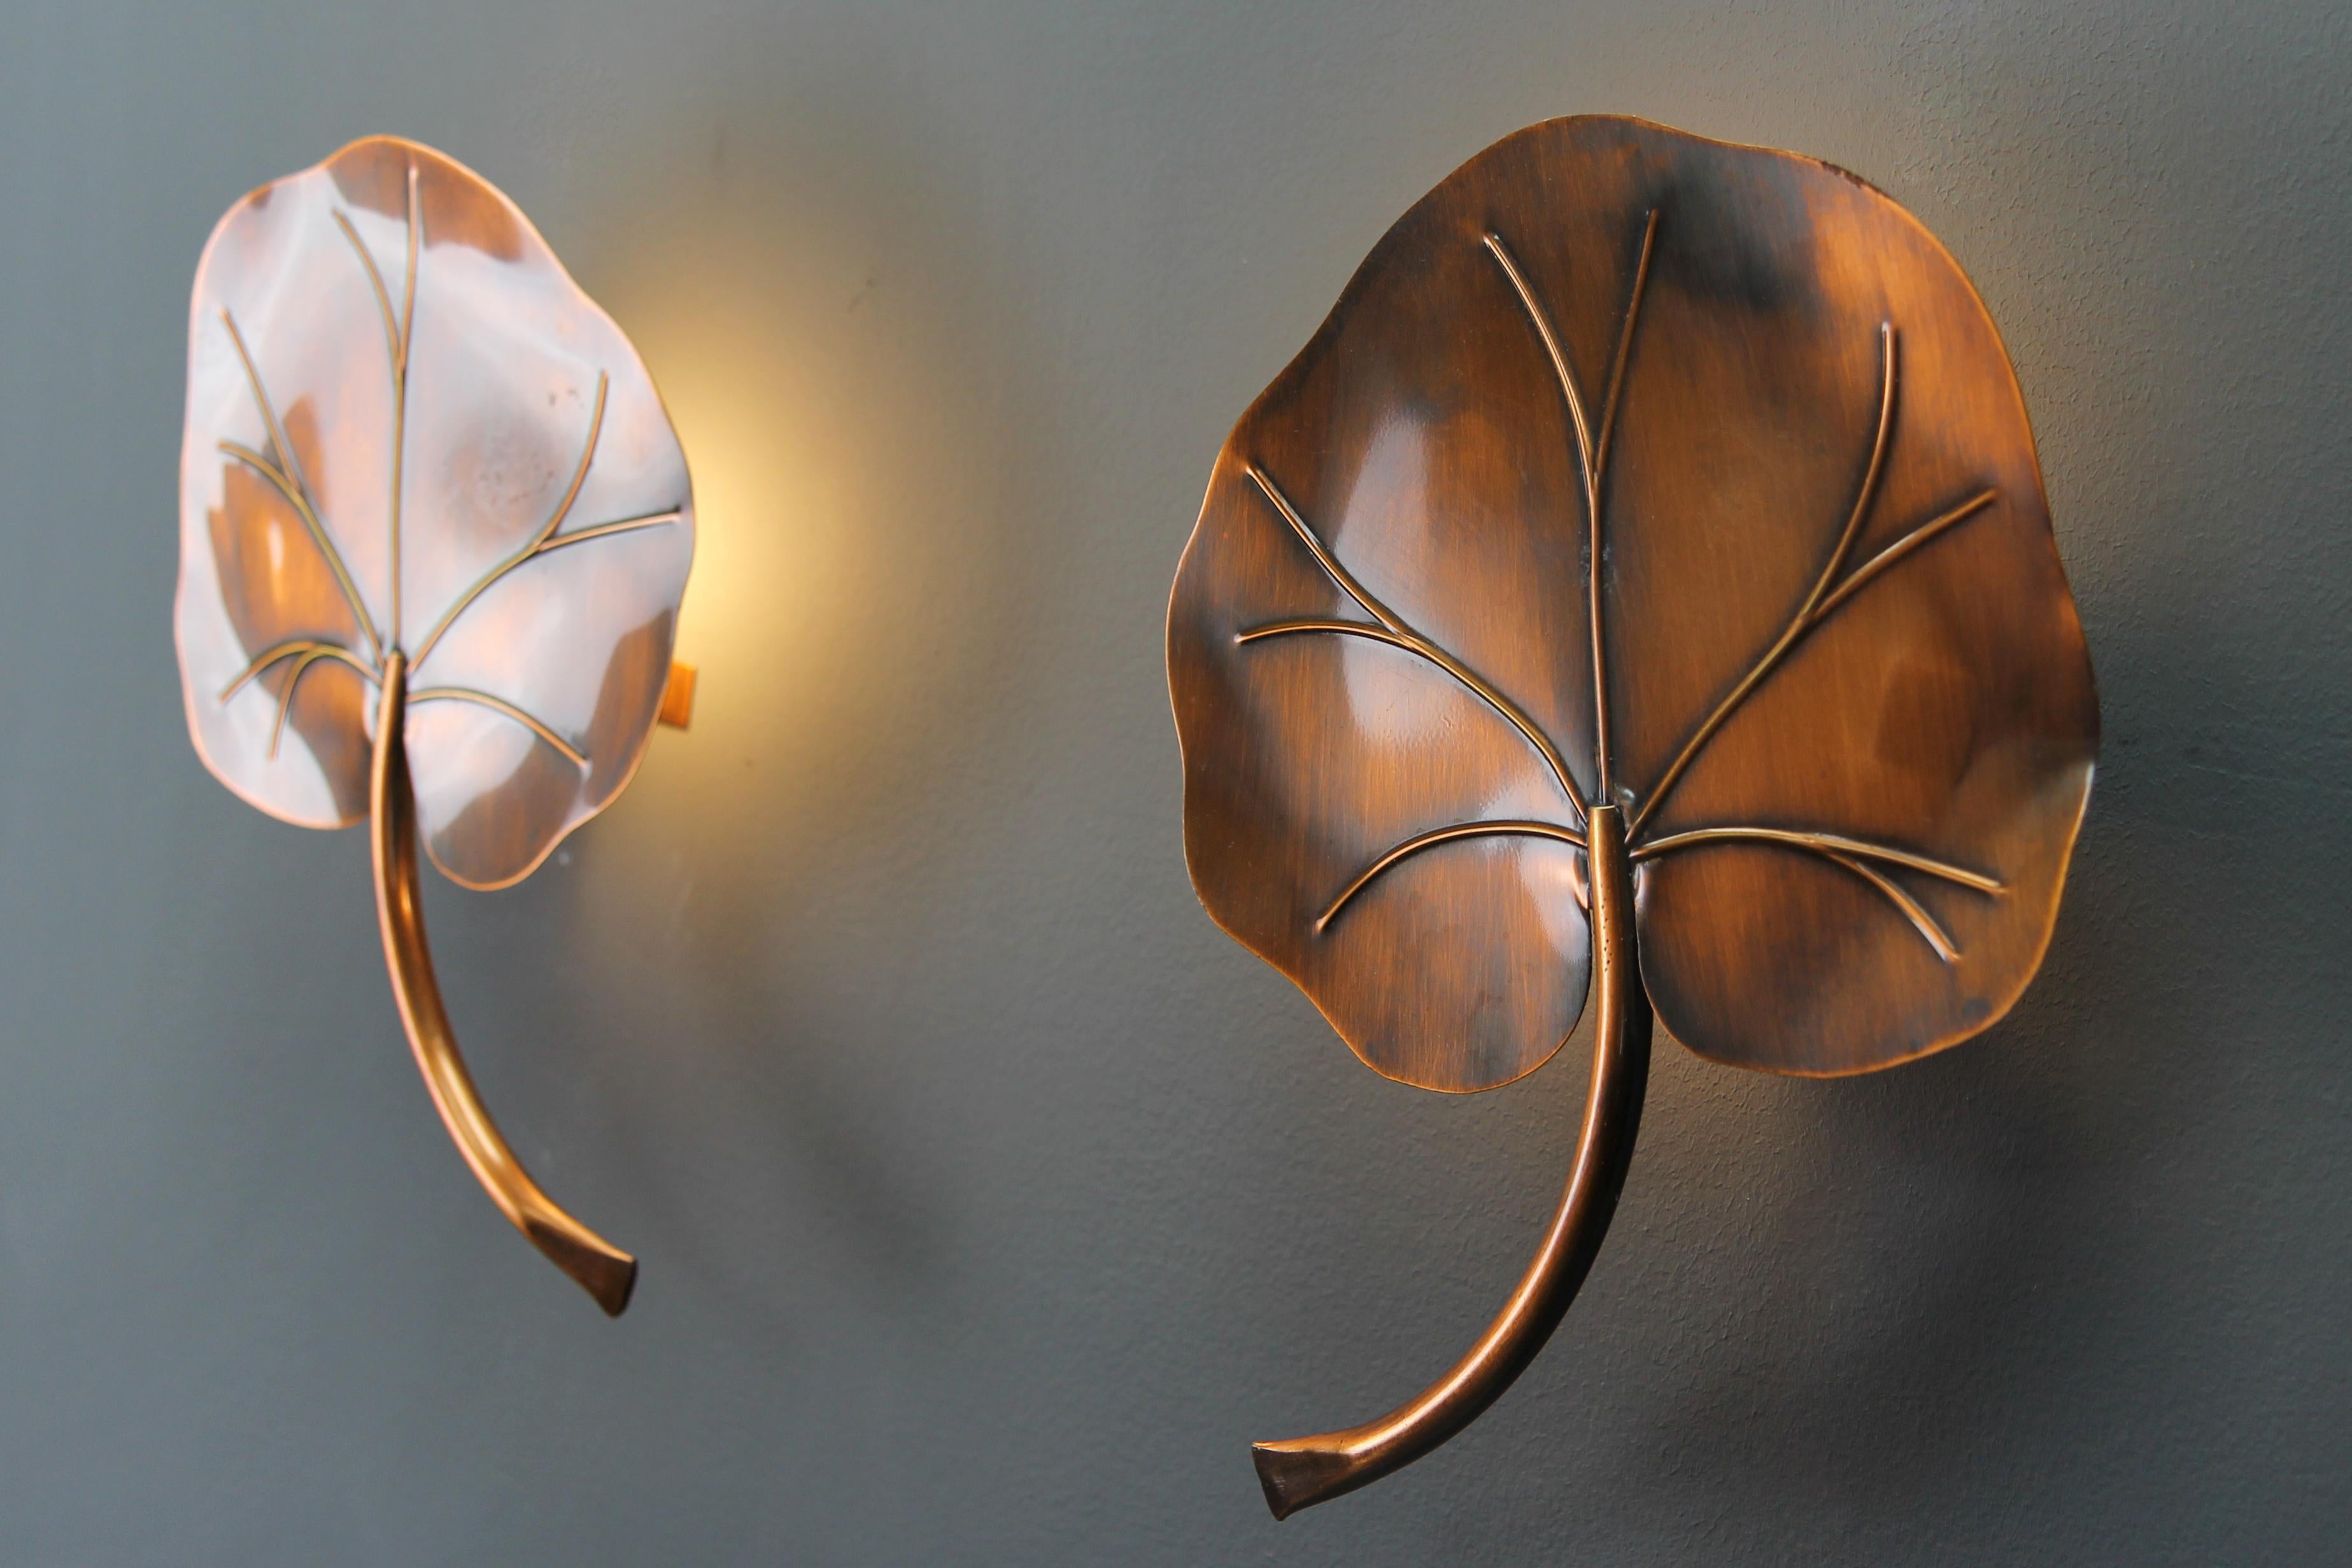 Pair of French Mid-Century Modern Brass Water Lily Leaf-Shaped Sconces For Sale 2